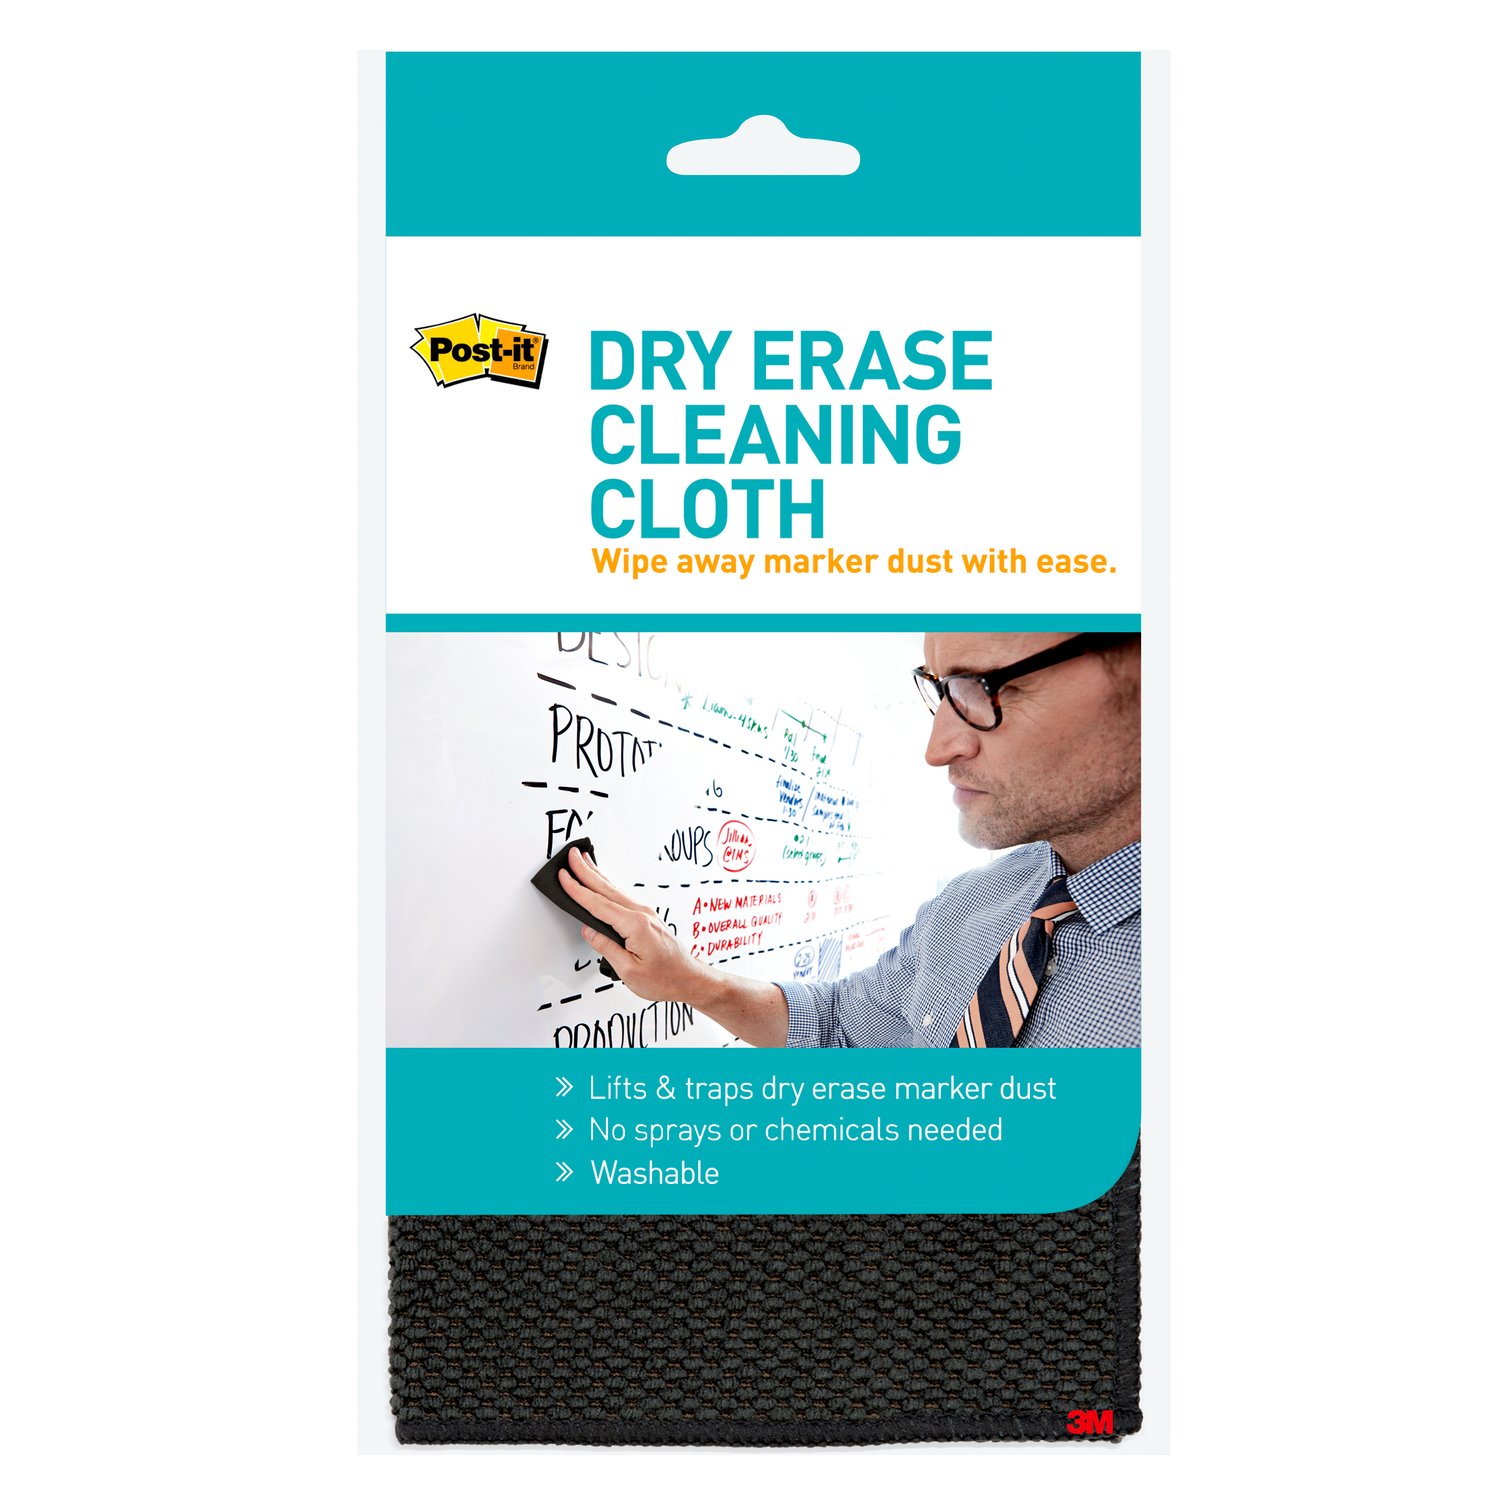 7100199897 - Post-it Dry Erase Cleaning Cloth DEFCLOTH, 11.6 in x 11.6 in (29.4 cm x
29.4 cm)